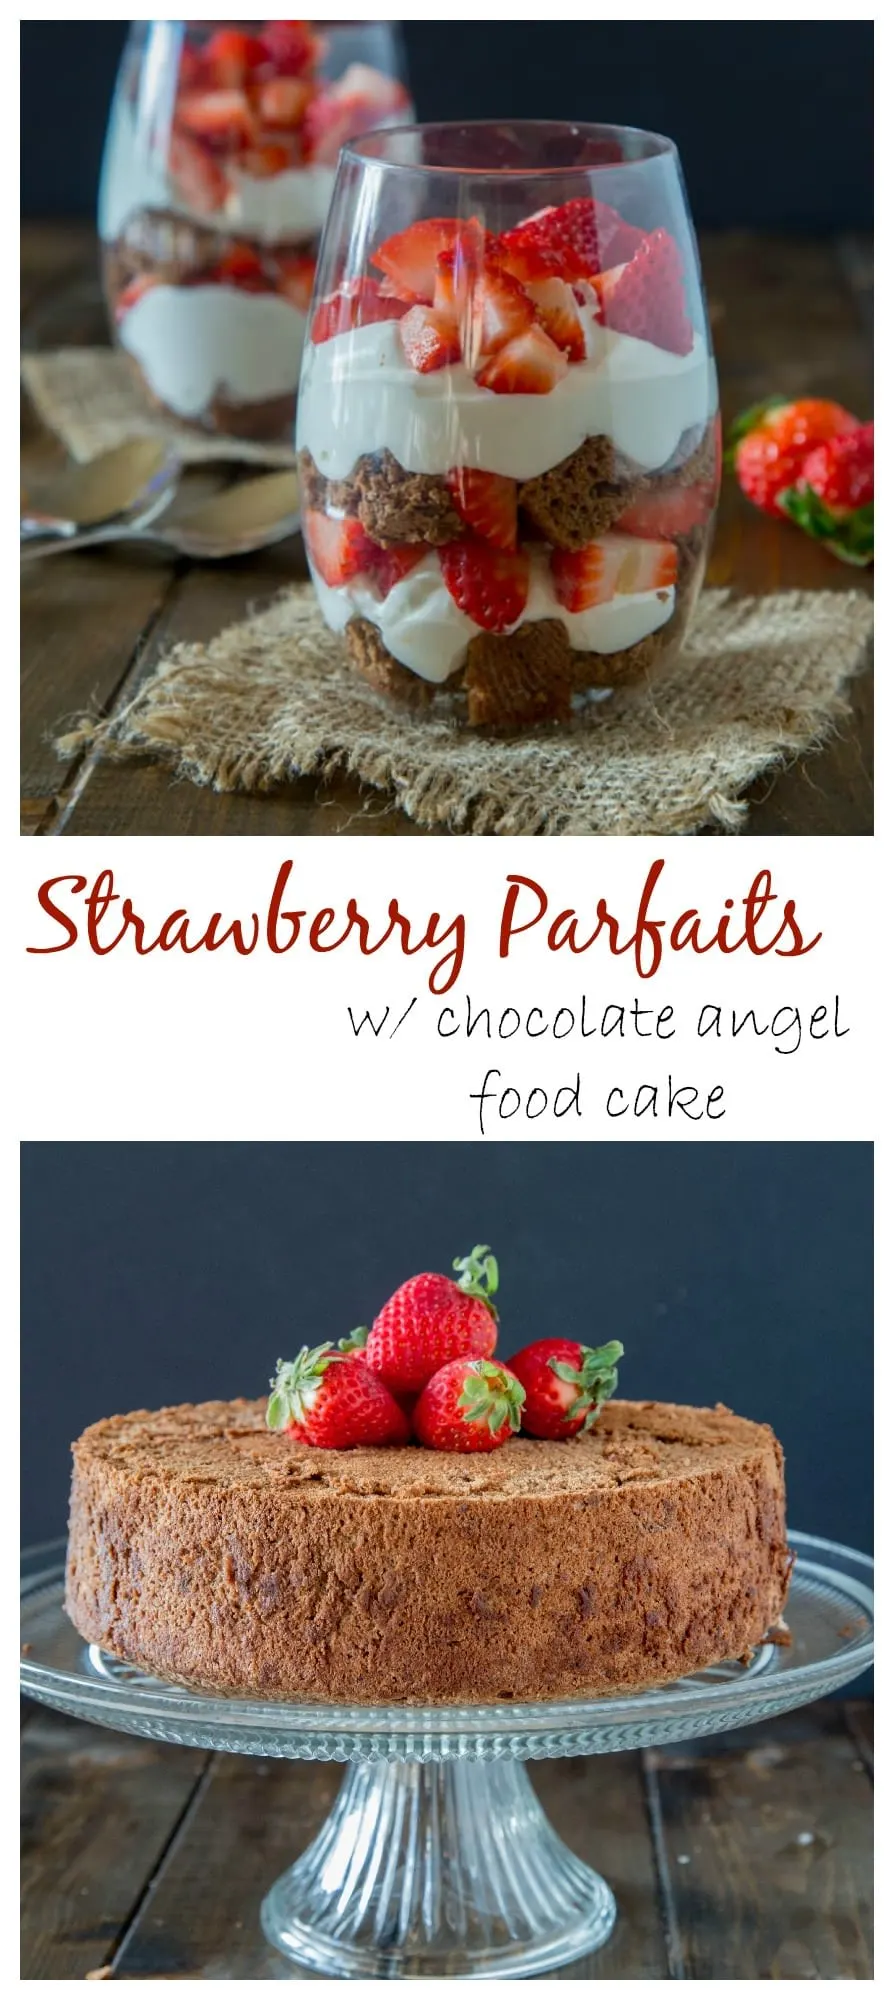 Strawberry Parfaits with Chocolate Angel Food Cake - Light and airy chocolate angel food cake, fresh homemade whipped cream and juicy strawberries make for an easy but show stopping dessert.